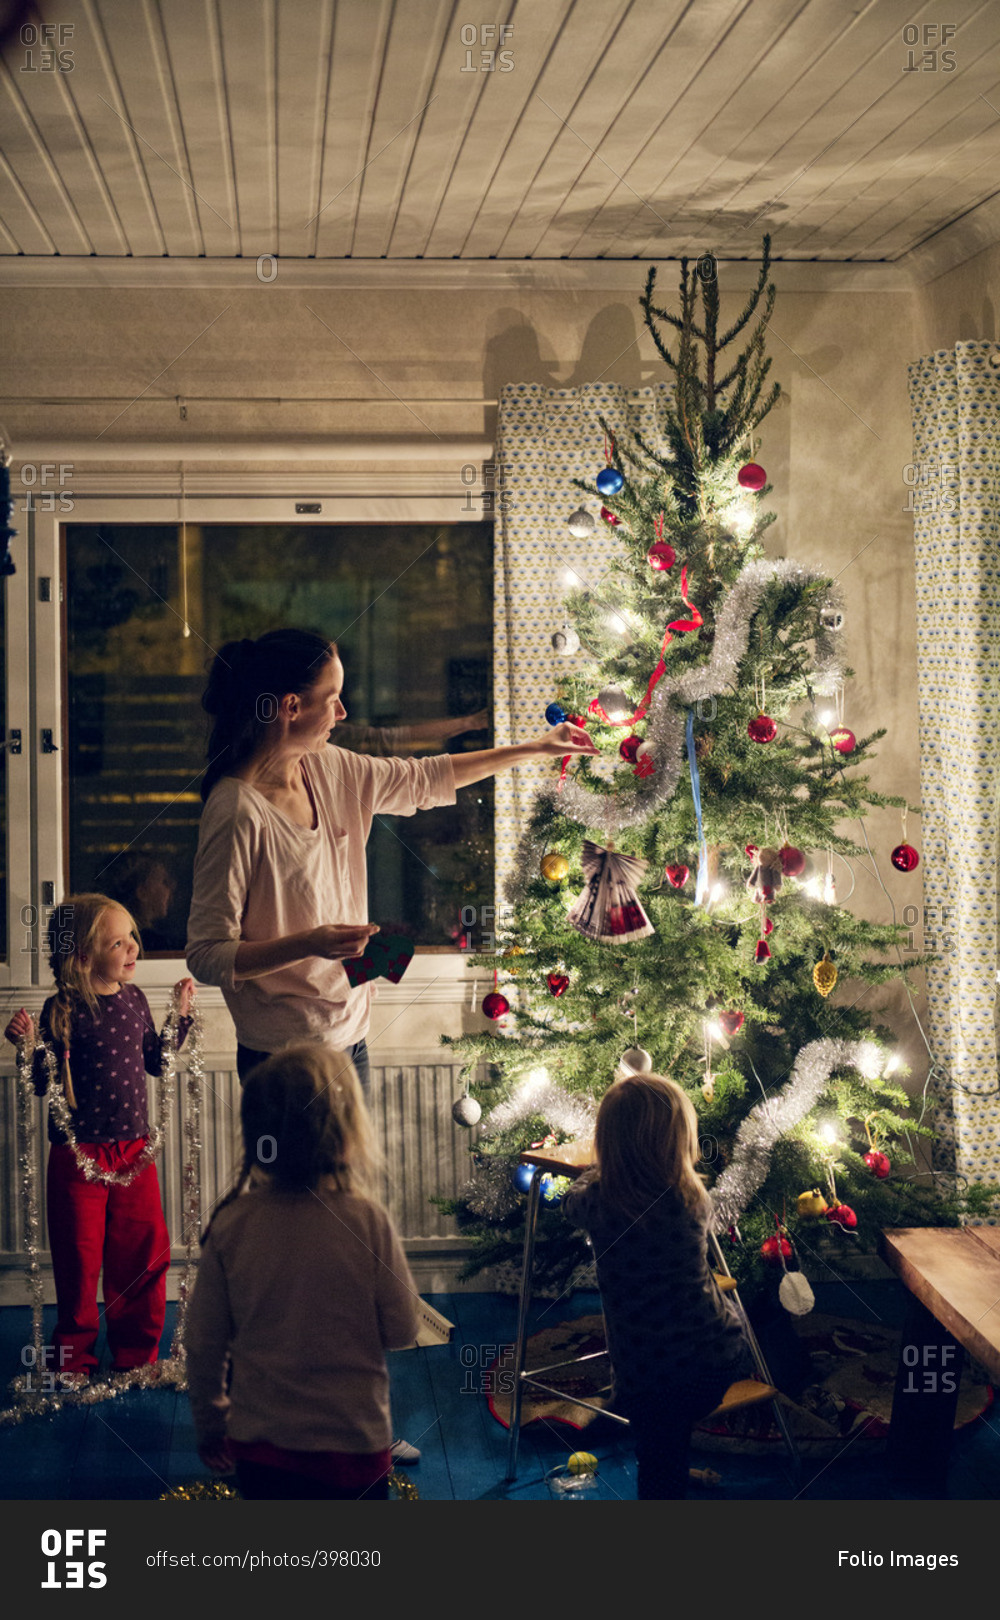 Finland, Mother with daughters (12-17 months, 2-3, 4-5) decorating christmas tree